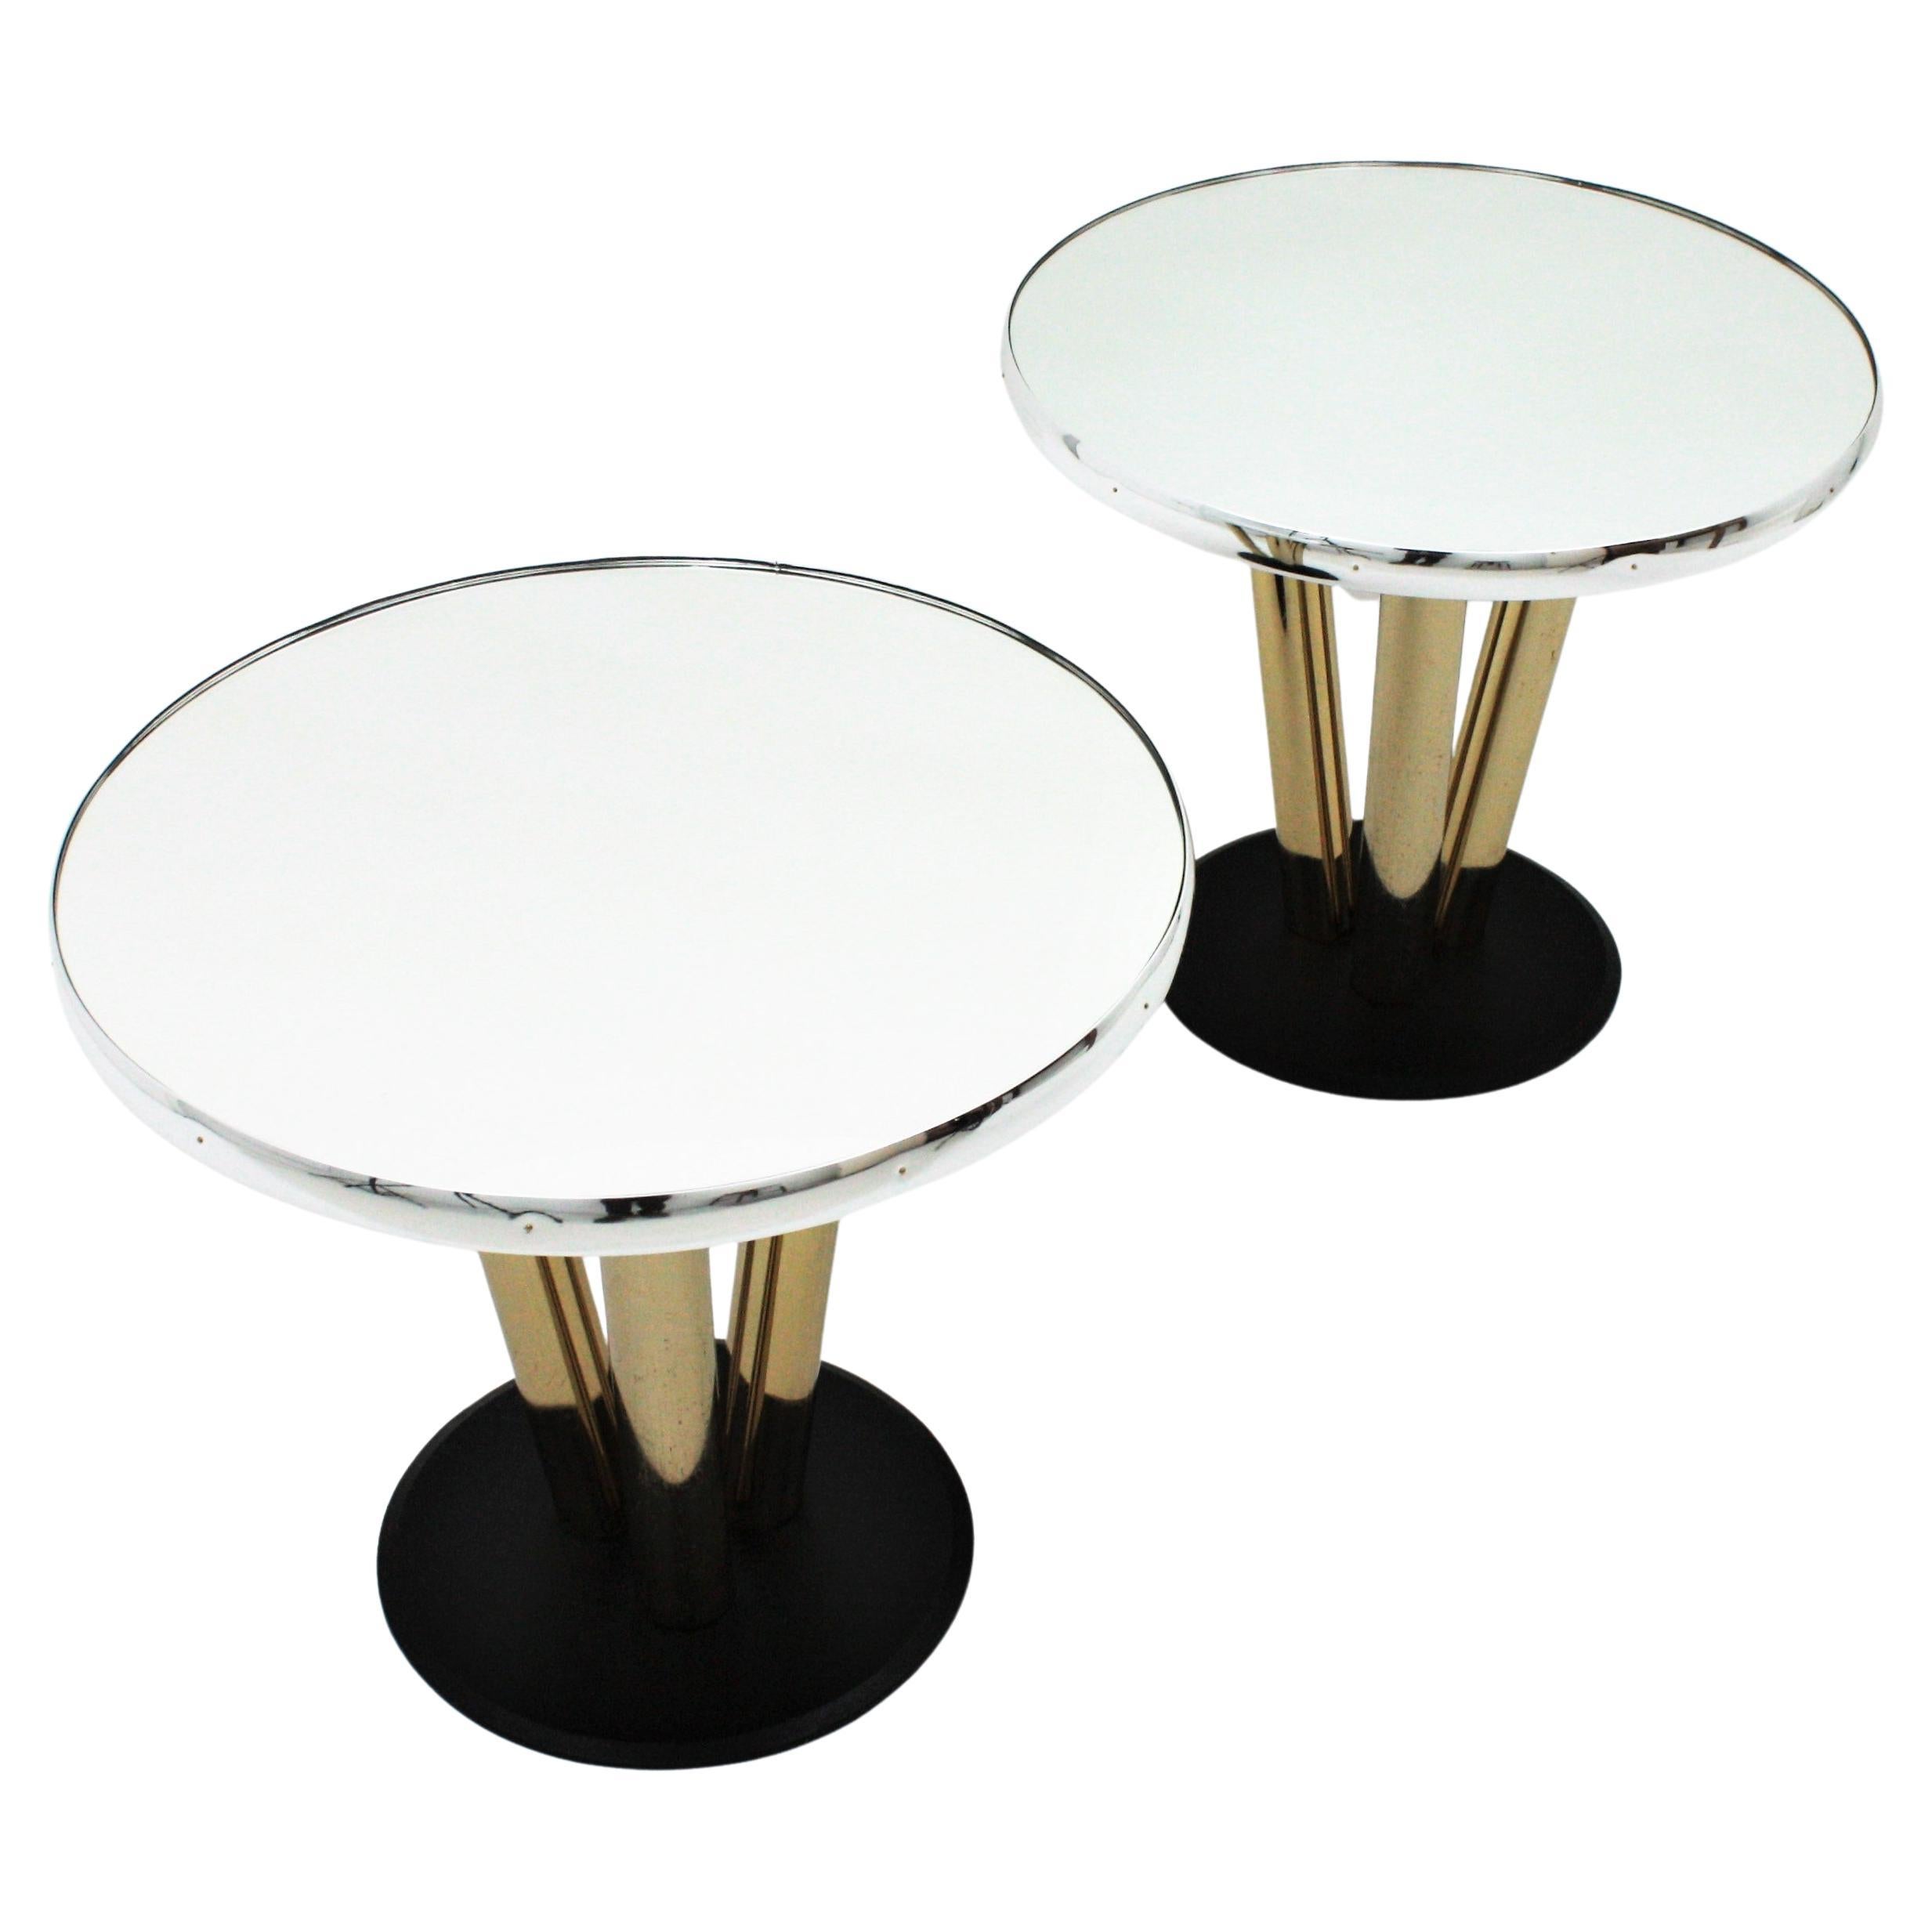 Pair of Round Side Tables in Brass, Mirror and Black Lacquer